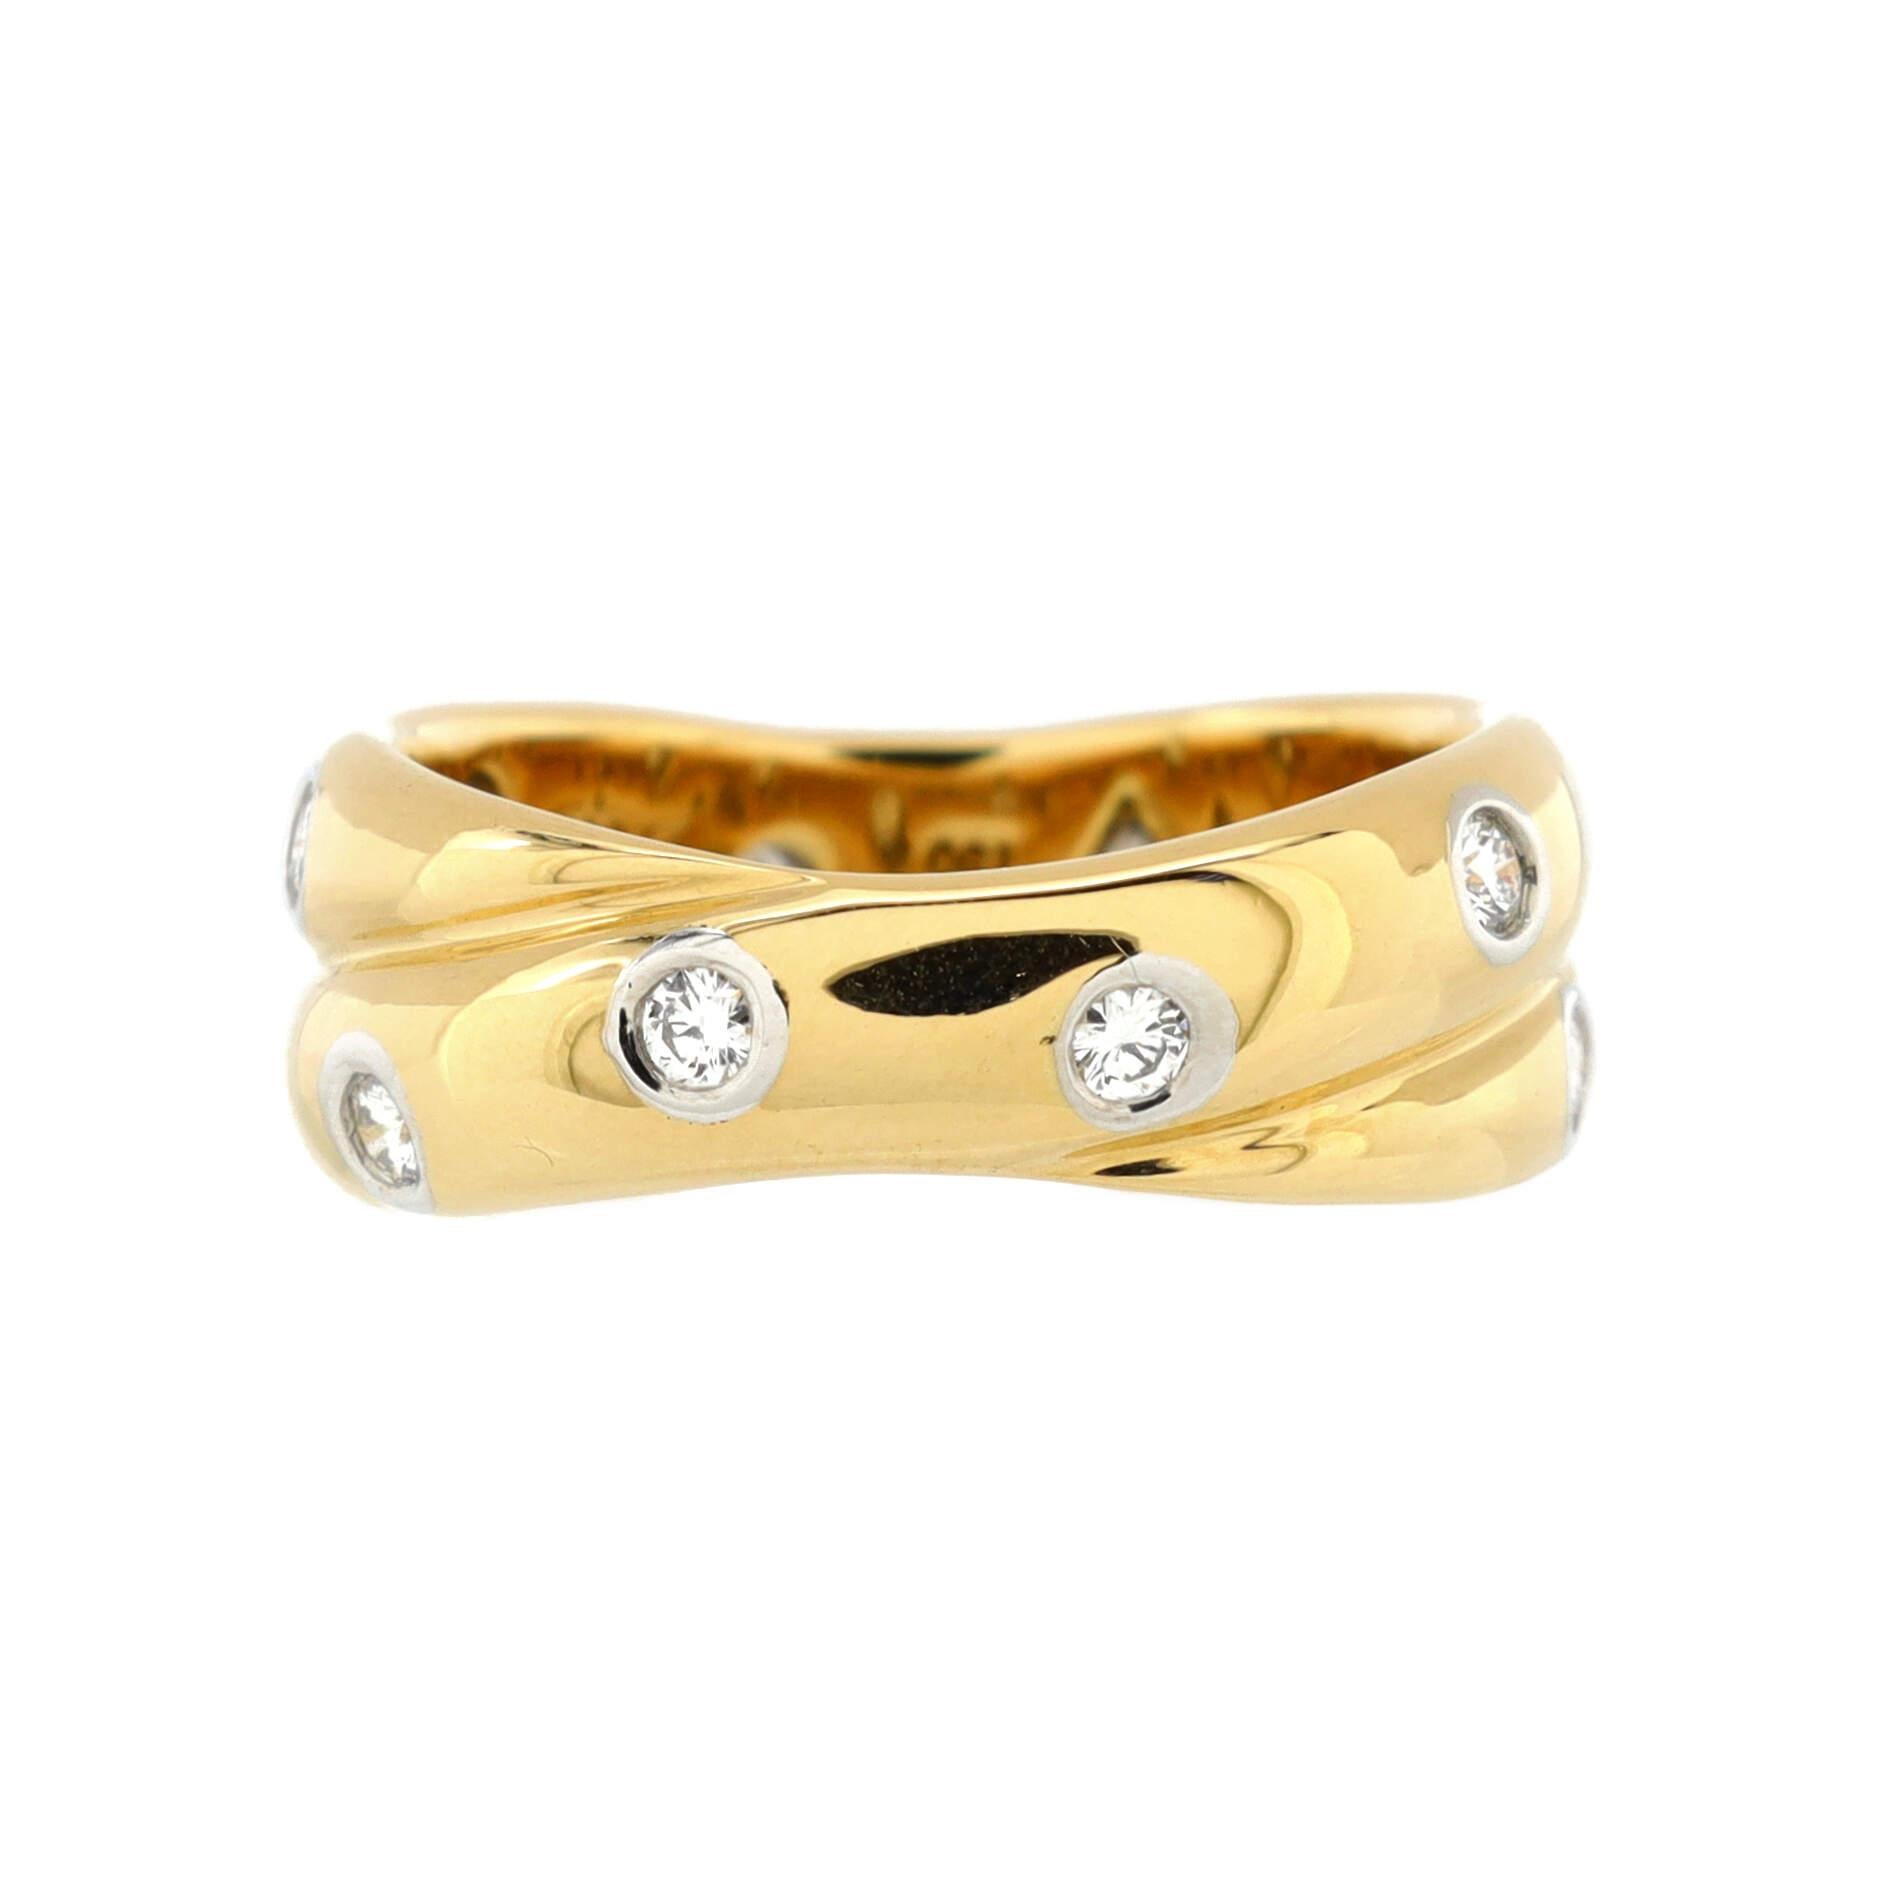 Condition: Very good. Moderate wear throughout.
Accessories: No Accessories
Measurements: Size: 5.75 - 51, Width: 7.20 mm
Designer: Tiffany & Co.
Model: Etoile Twist Band Ring 18K Yellow Gold and Platinum with Diamonds
Exterior Color: Yellow